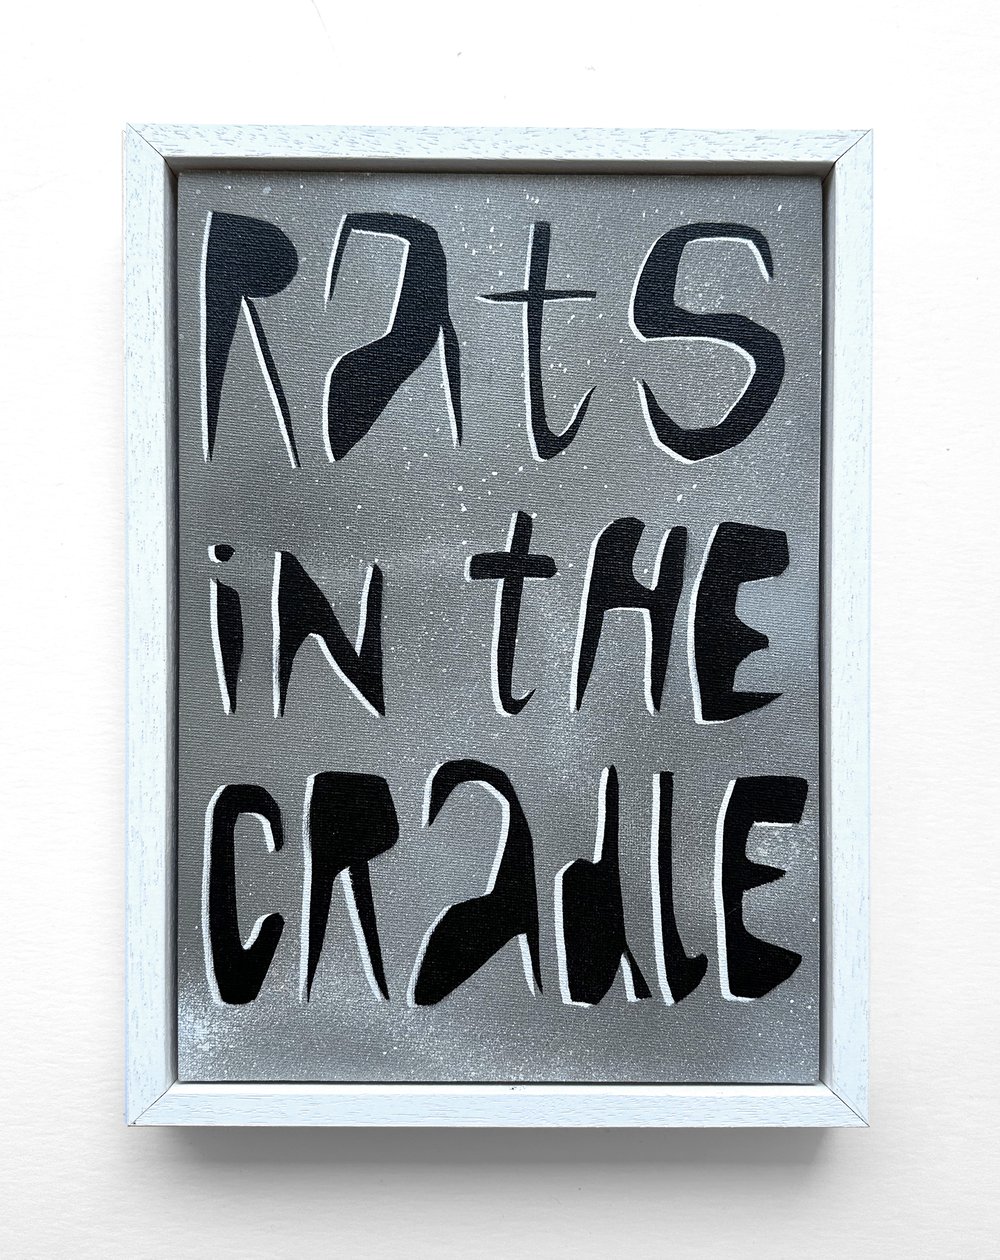 Image of ‘Rats in the Cradle’ by EDWIN